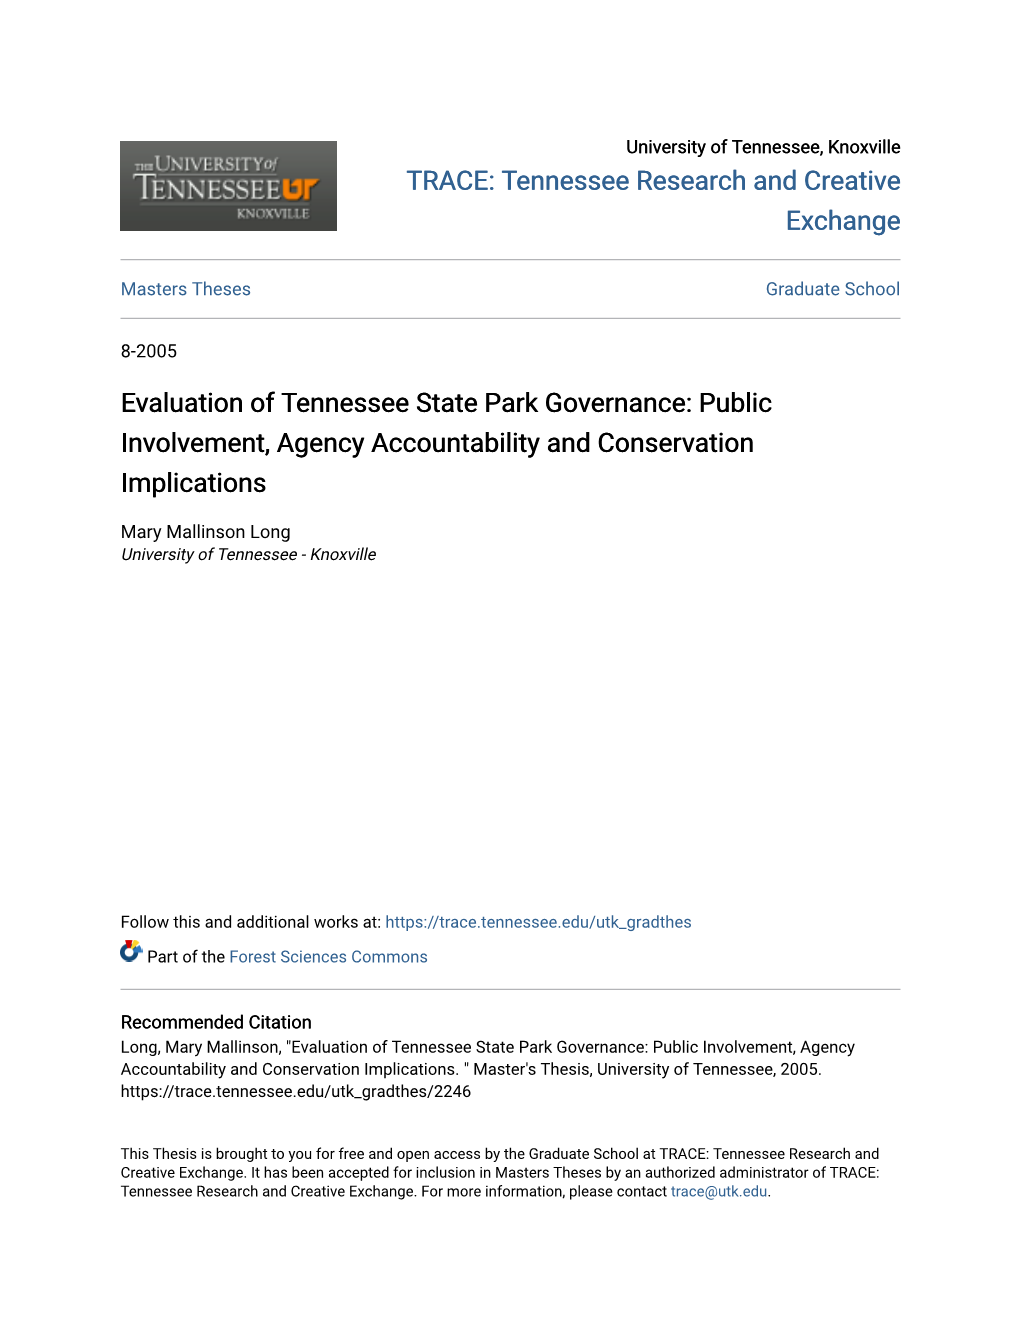 Evaluation of Tennessee State Park Governance: Public Involvement, Agency Accountability and Conservation Implications